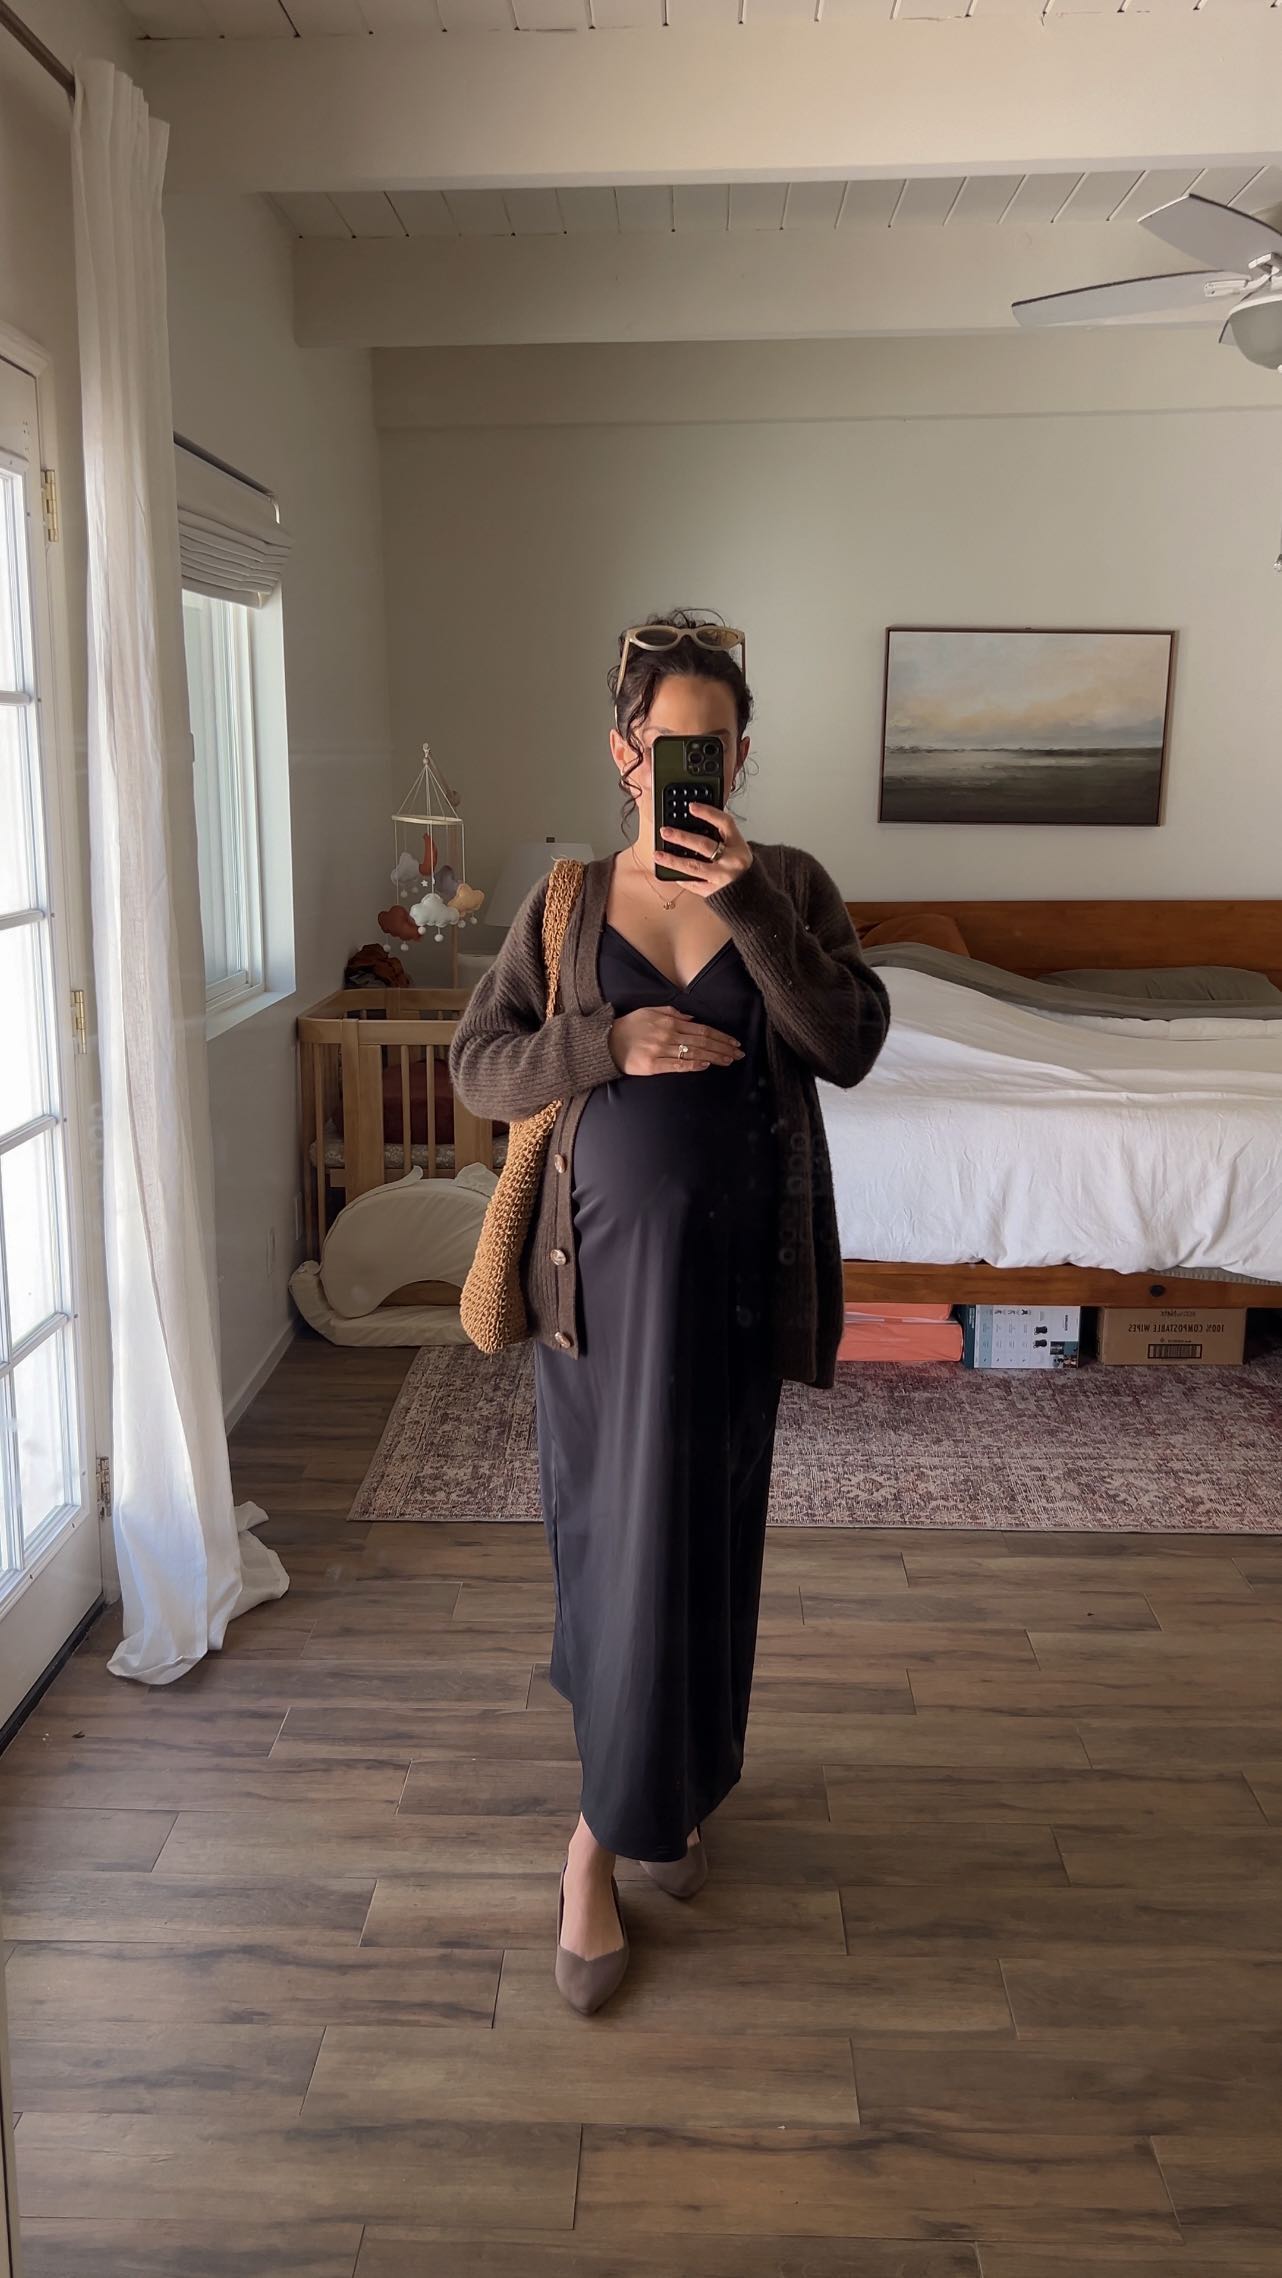 Dress the bump— 39 weeks pregnant 🤠

77° + sunny and officially full term 🤎 #39weeks

Dress @legoeheritage
Cardigan @one